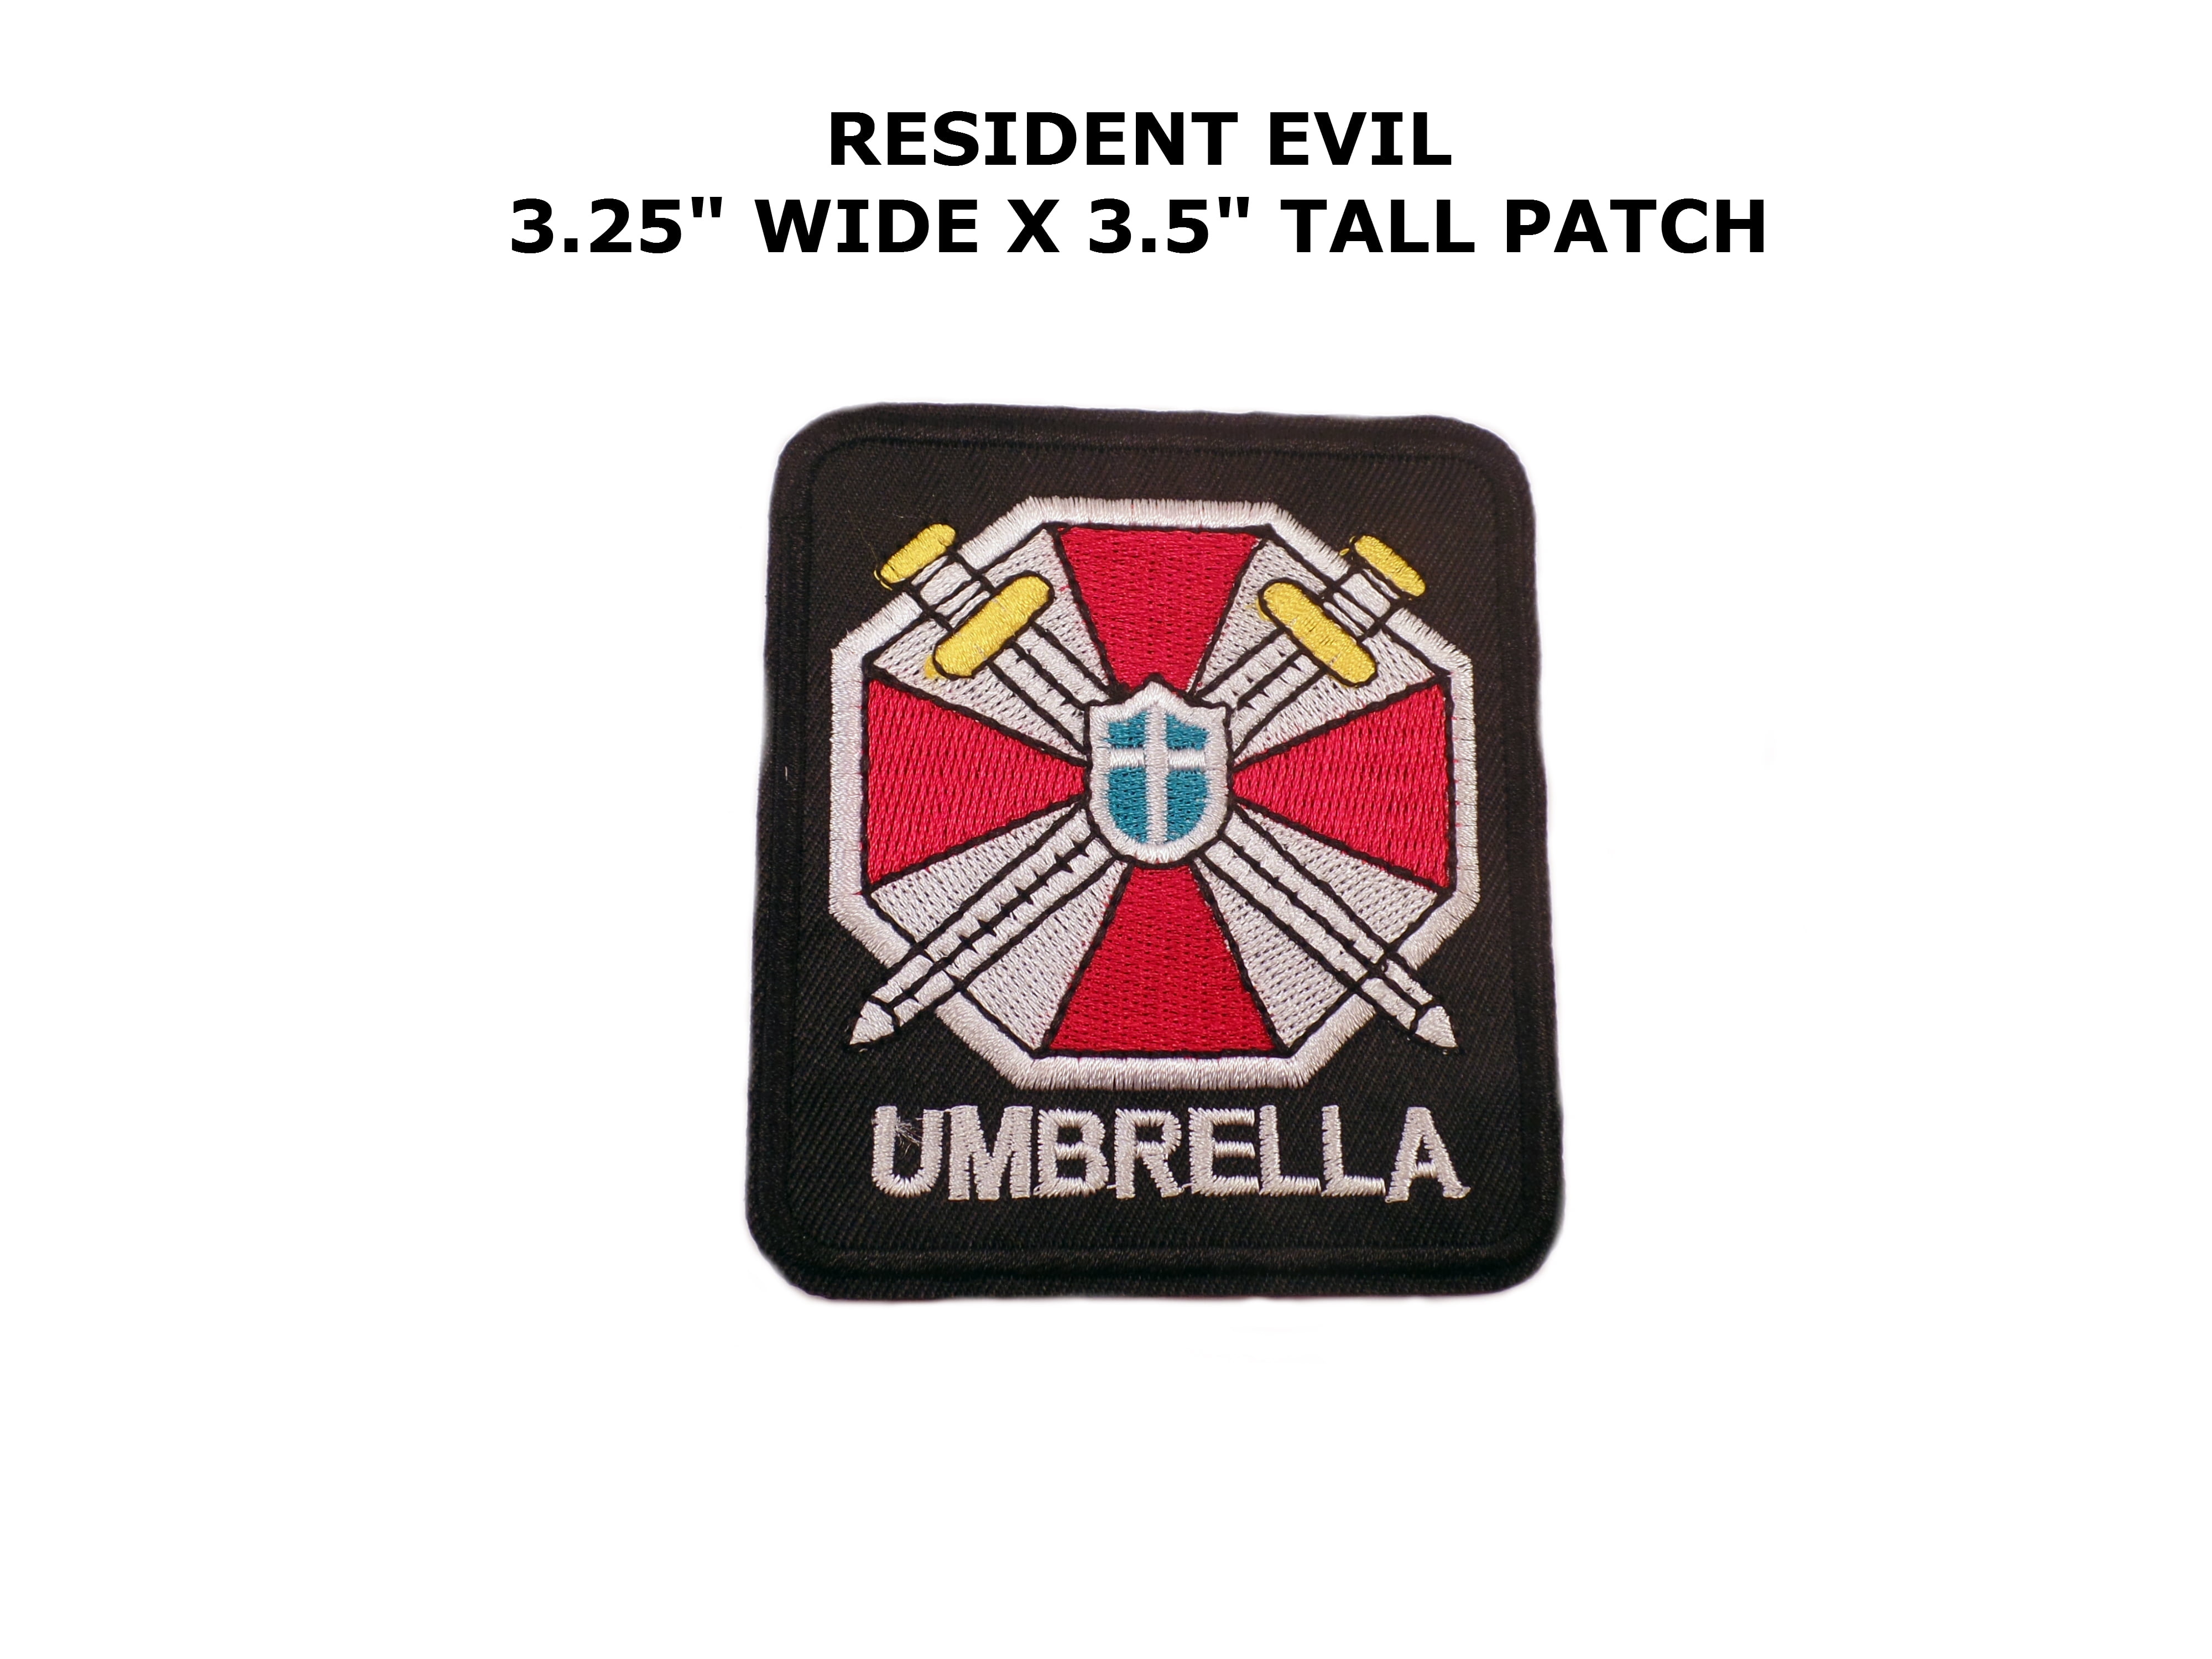 RESIDENT EVIL LARGE SIZE UMBRELLA CORPORATION EMBROIDERED CORPORATION LOGO PATCH 